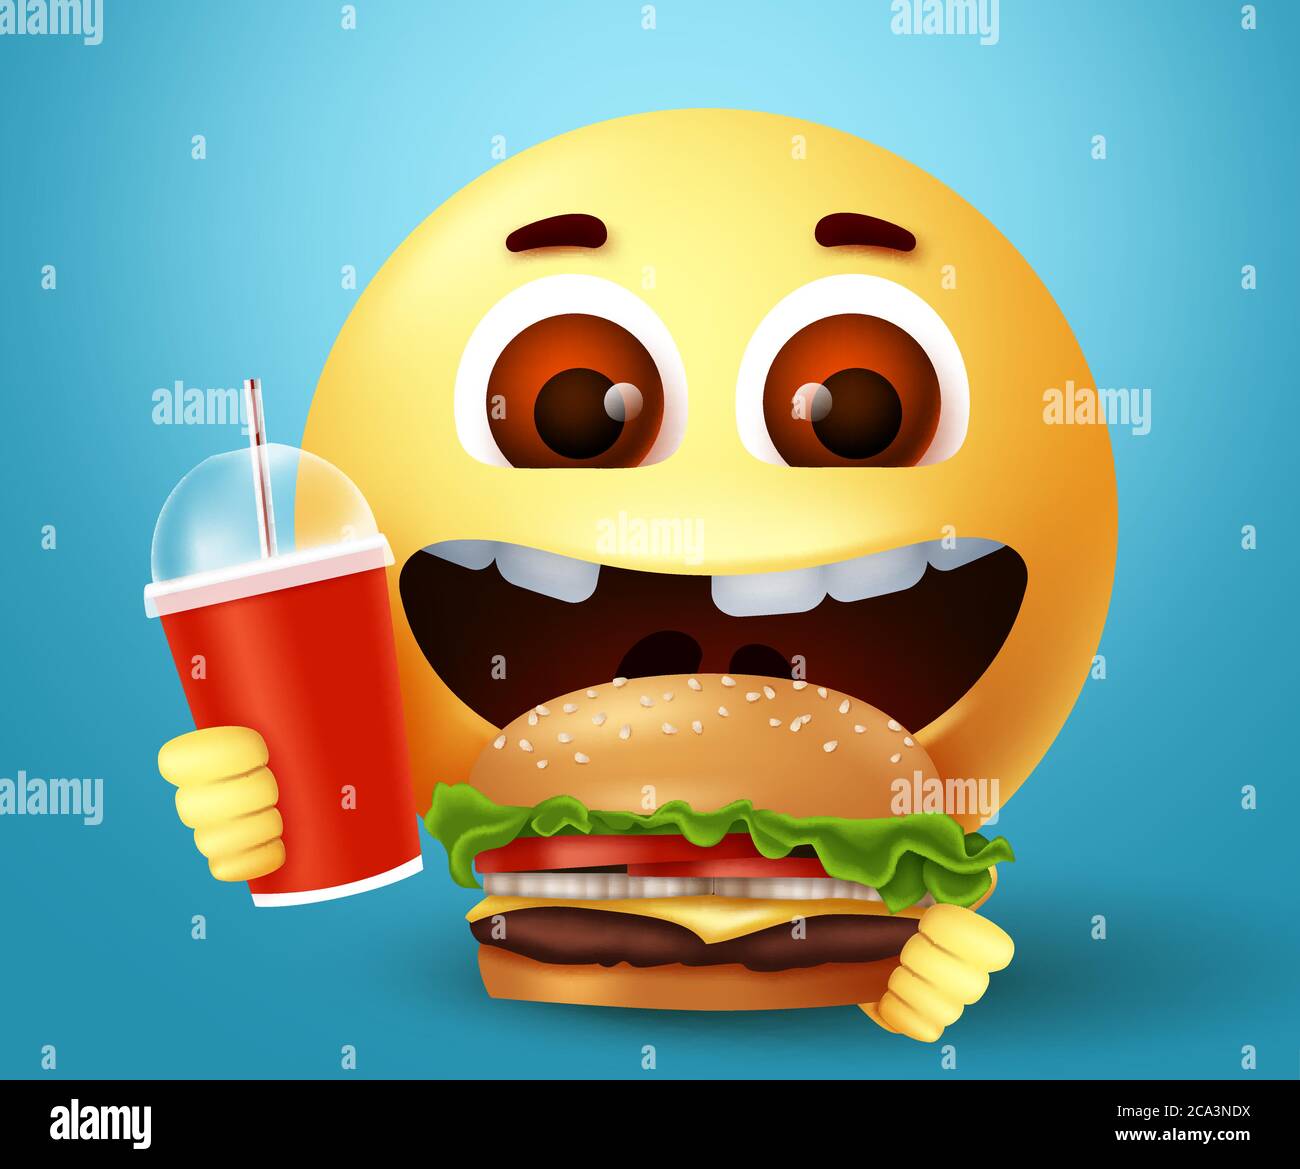 Emoji smiley happy eating fast food burger character vector design. Smiley emoticon with happy and excited facial expression holding yummy hamburger Stock Vector